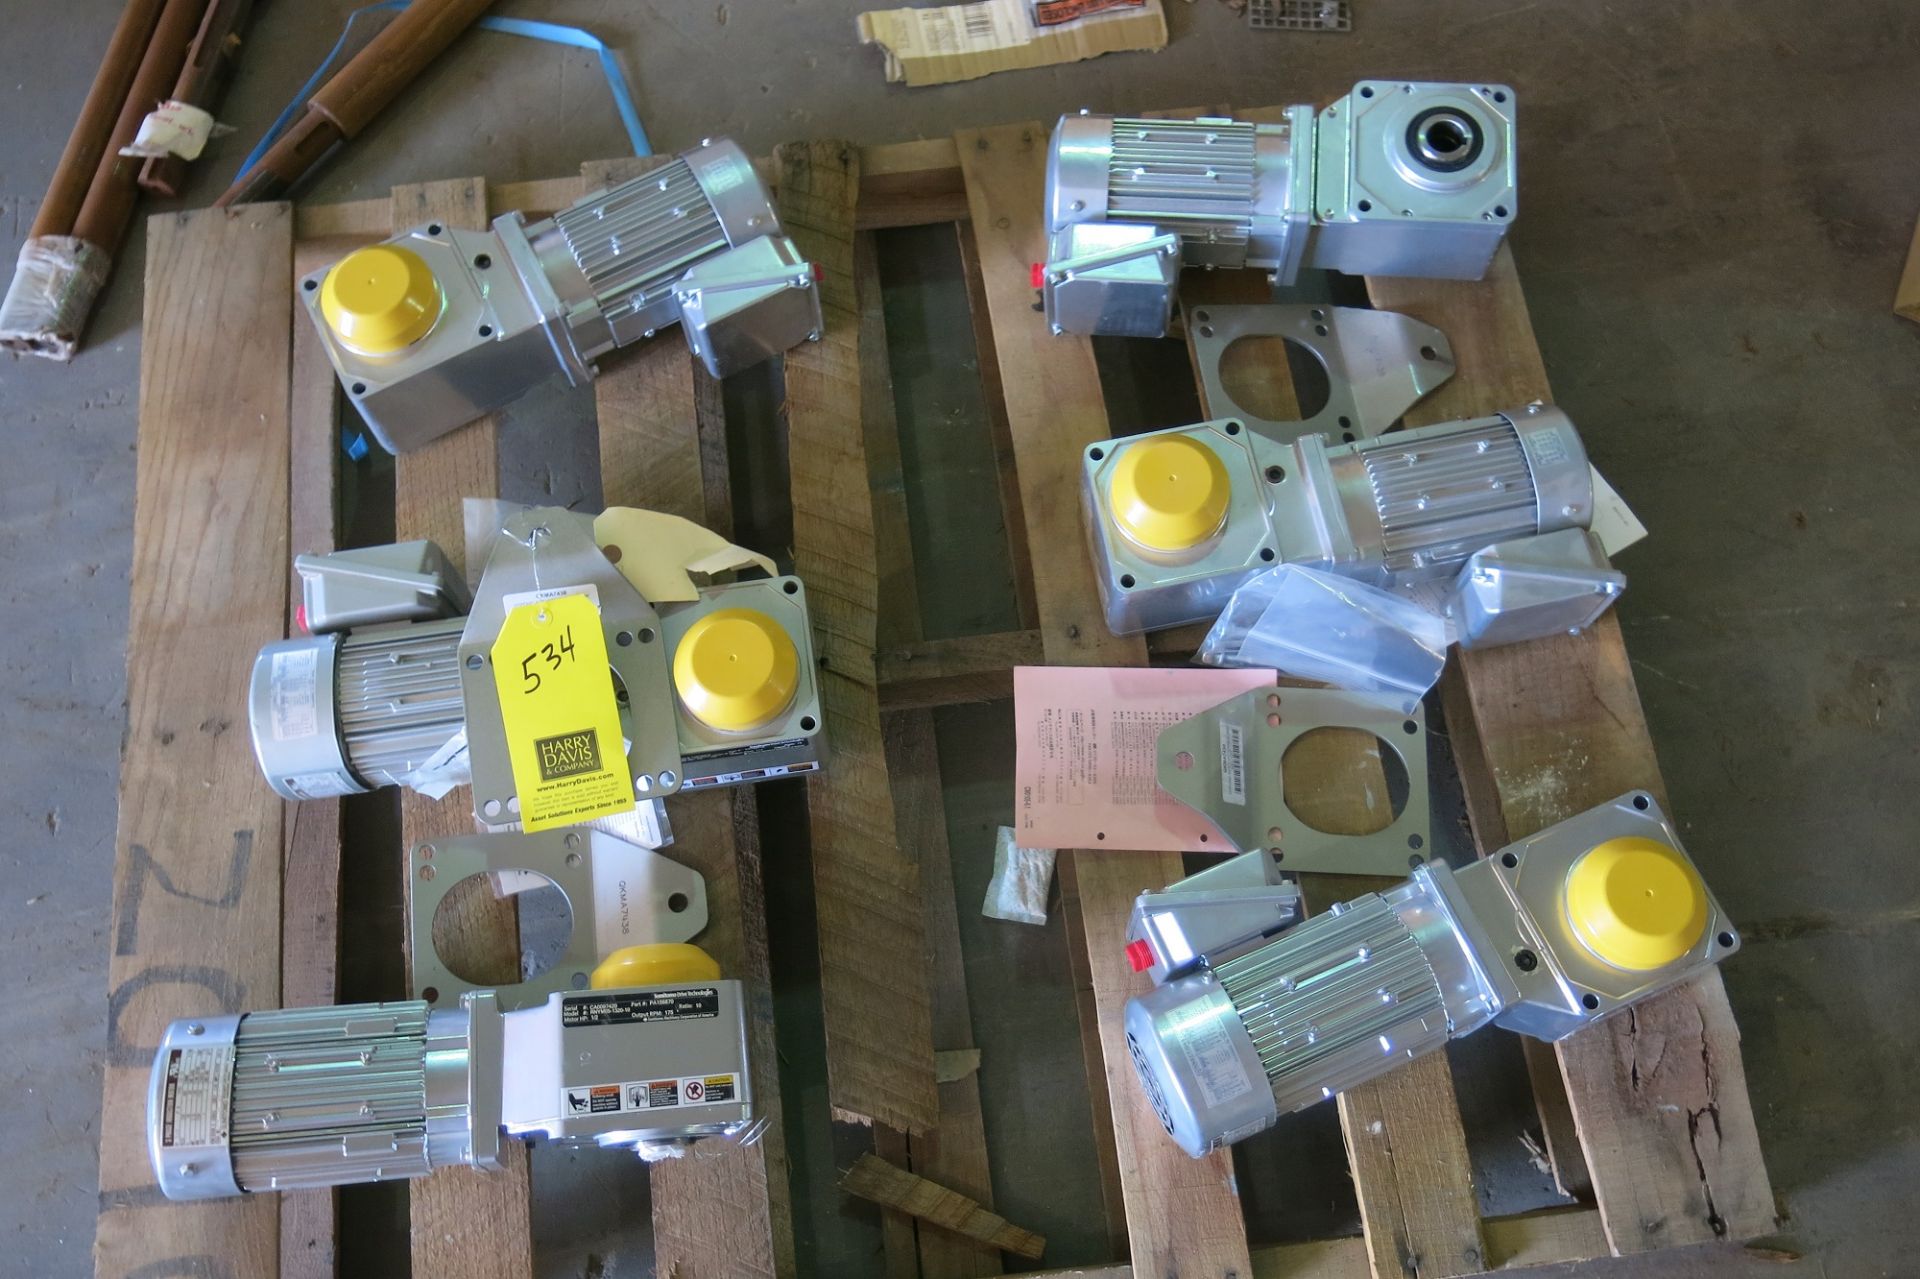 (11) Sumitomo Gear Reducing Drives and (8) Altex Gear Reducing Drives, up to 1 HP